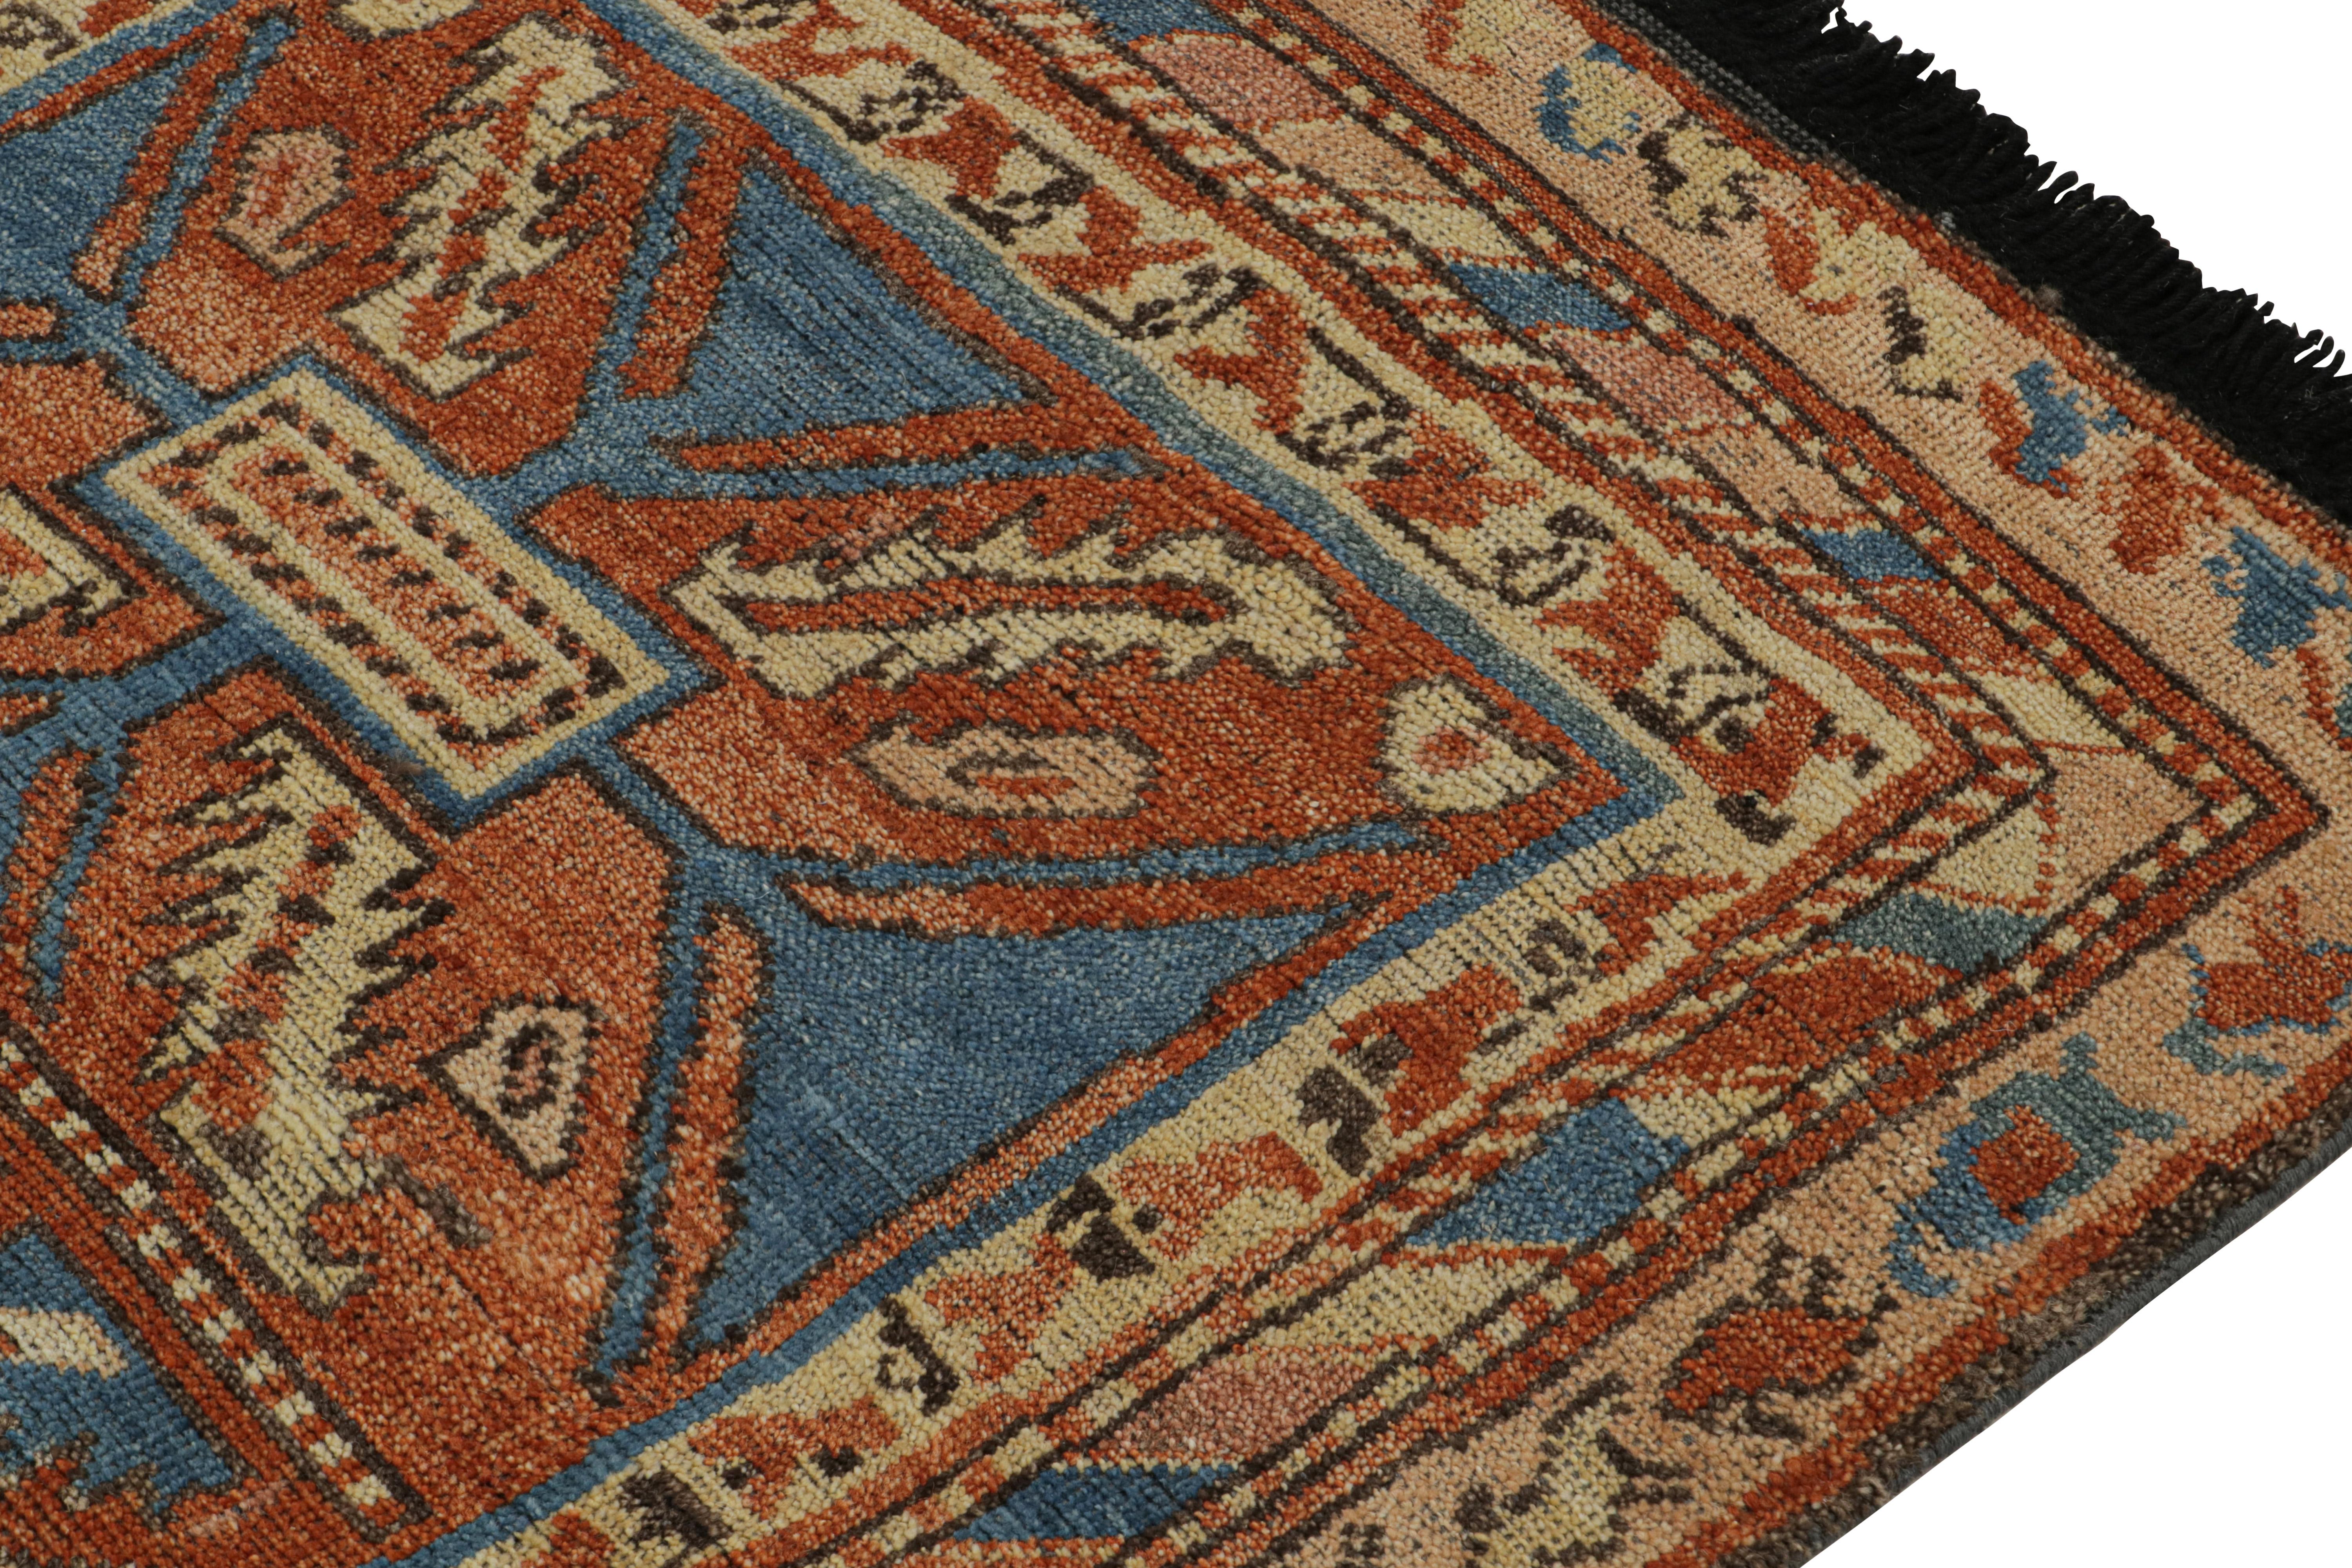 Rug & Kilim’s Tribal Style Runner Rug in Beige, Red and Blue Geometric Patterns In New Condition For Sale In Long Island City, NY